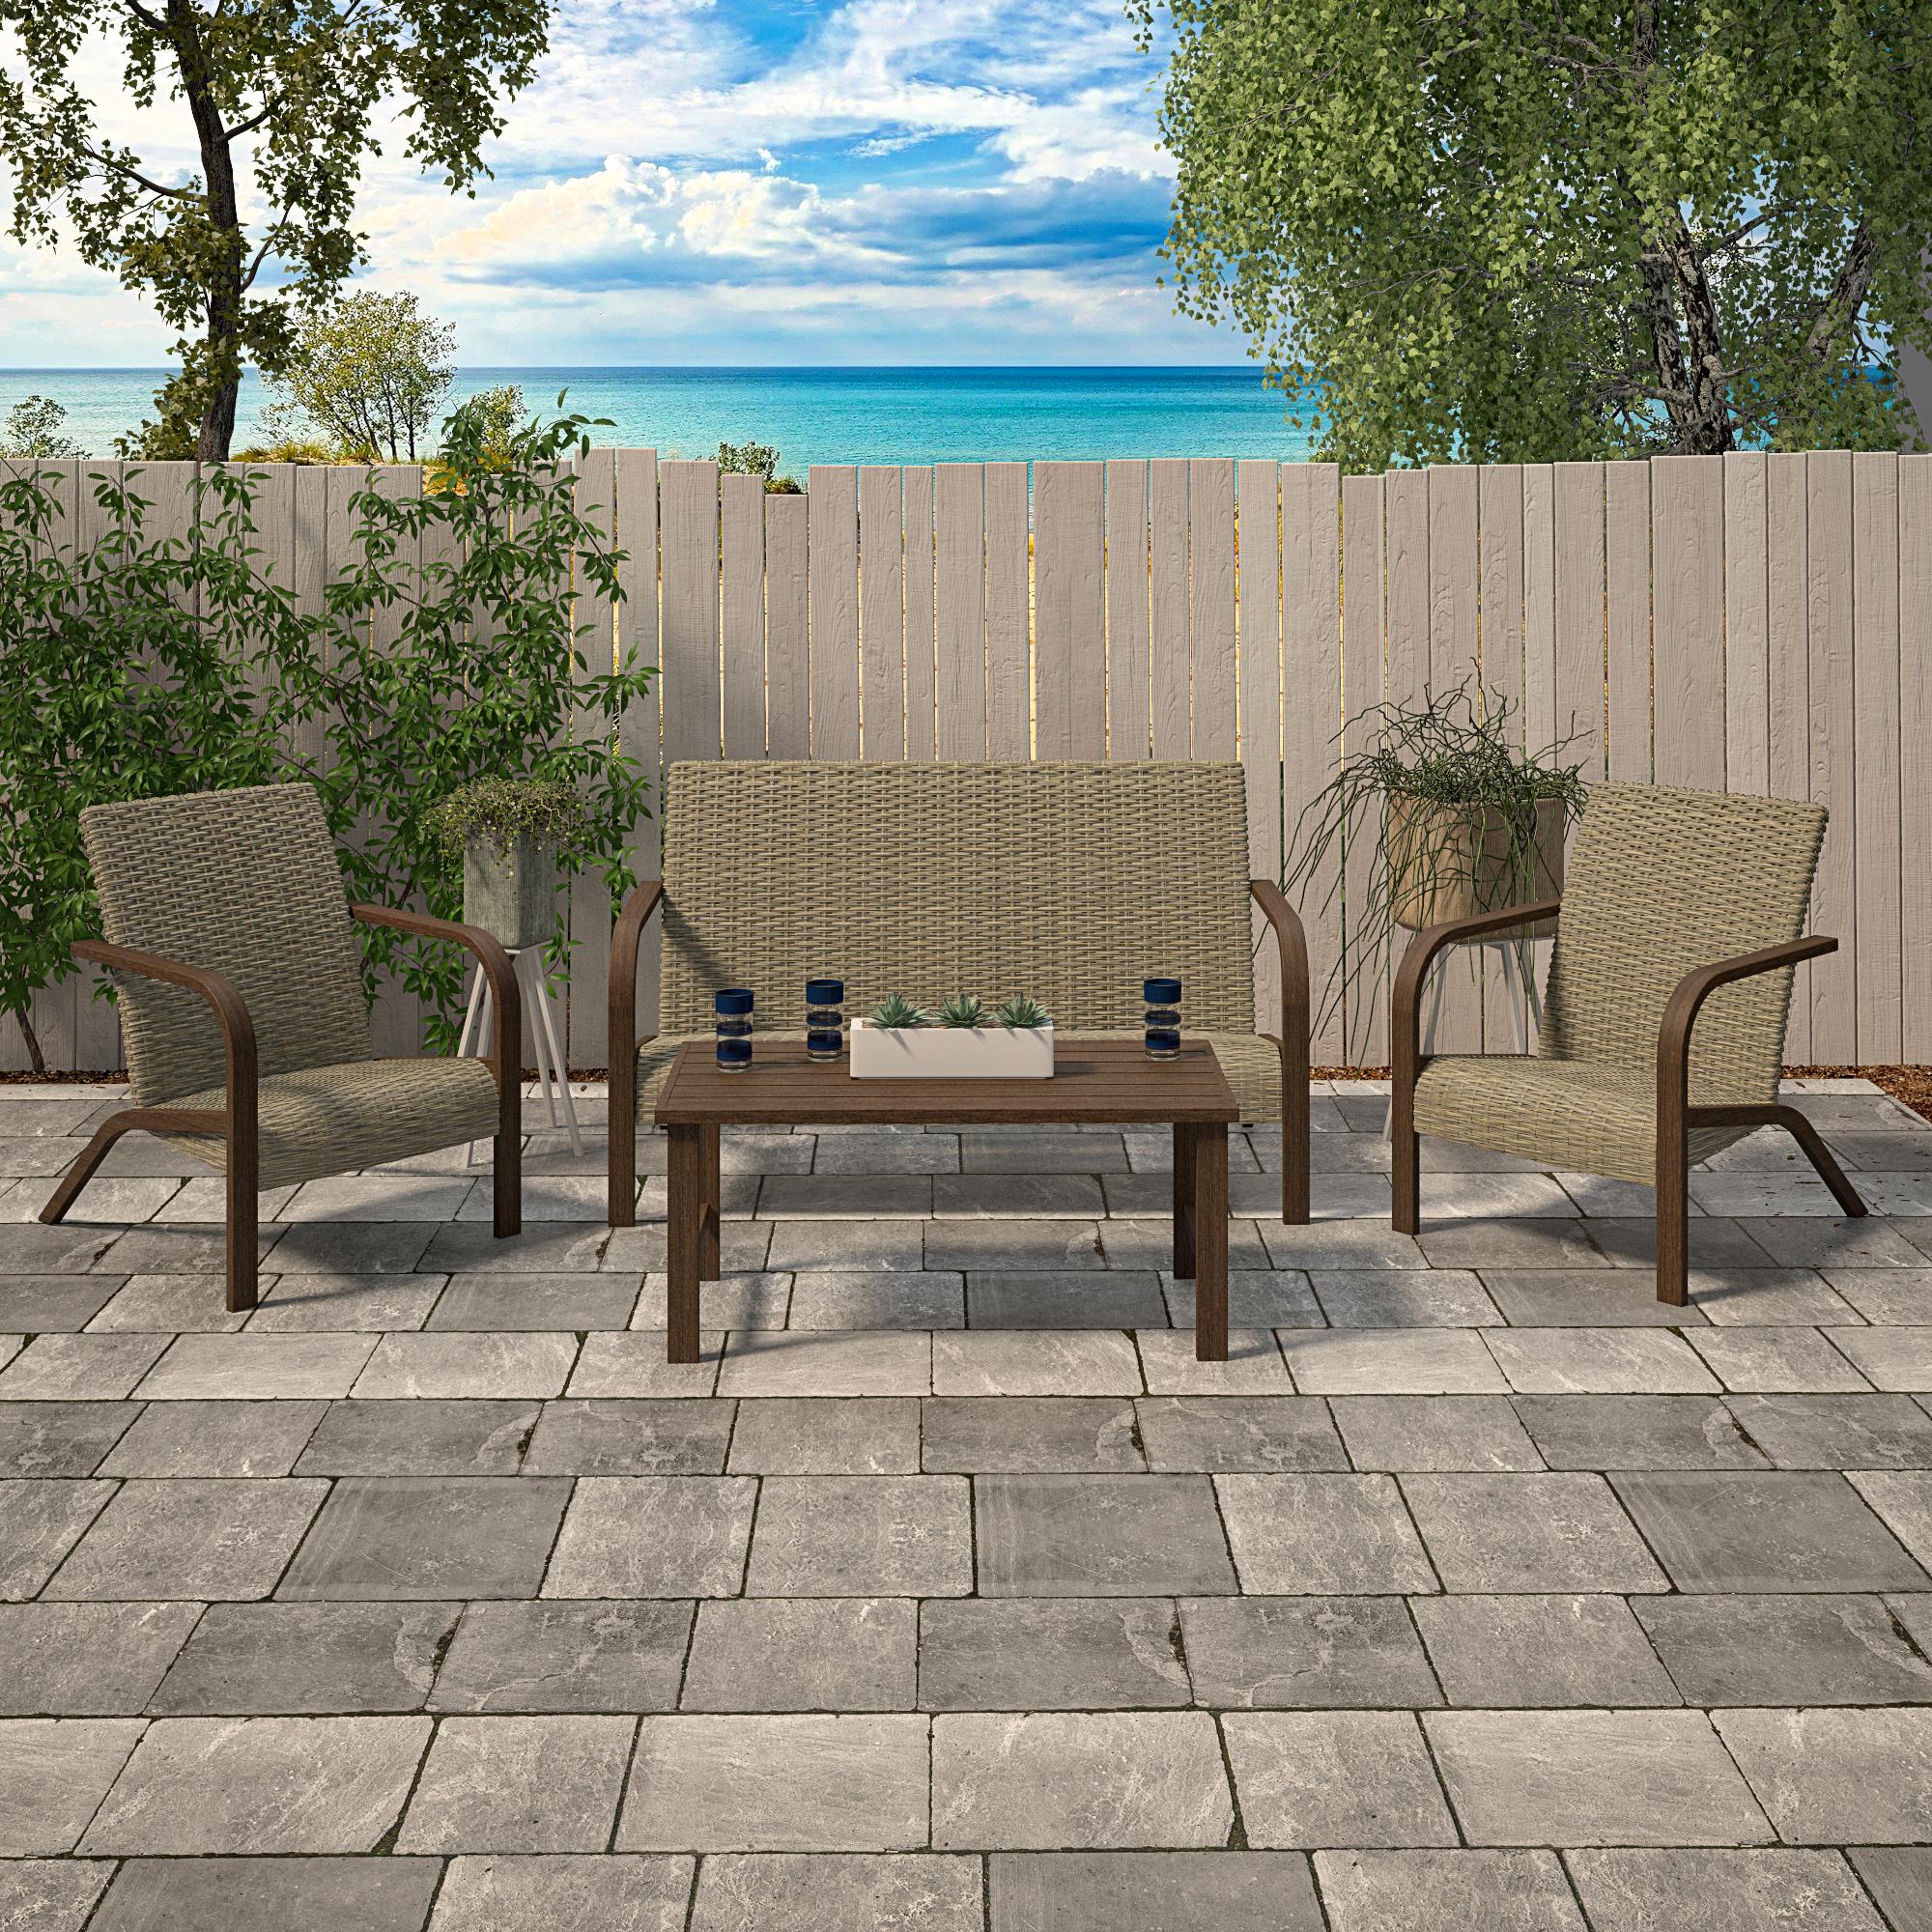 COSCO Outdoor Living, SmartWick, Patio Lounge Chairs, 2-Pack, Warm Gray - image 4 of 9